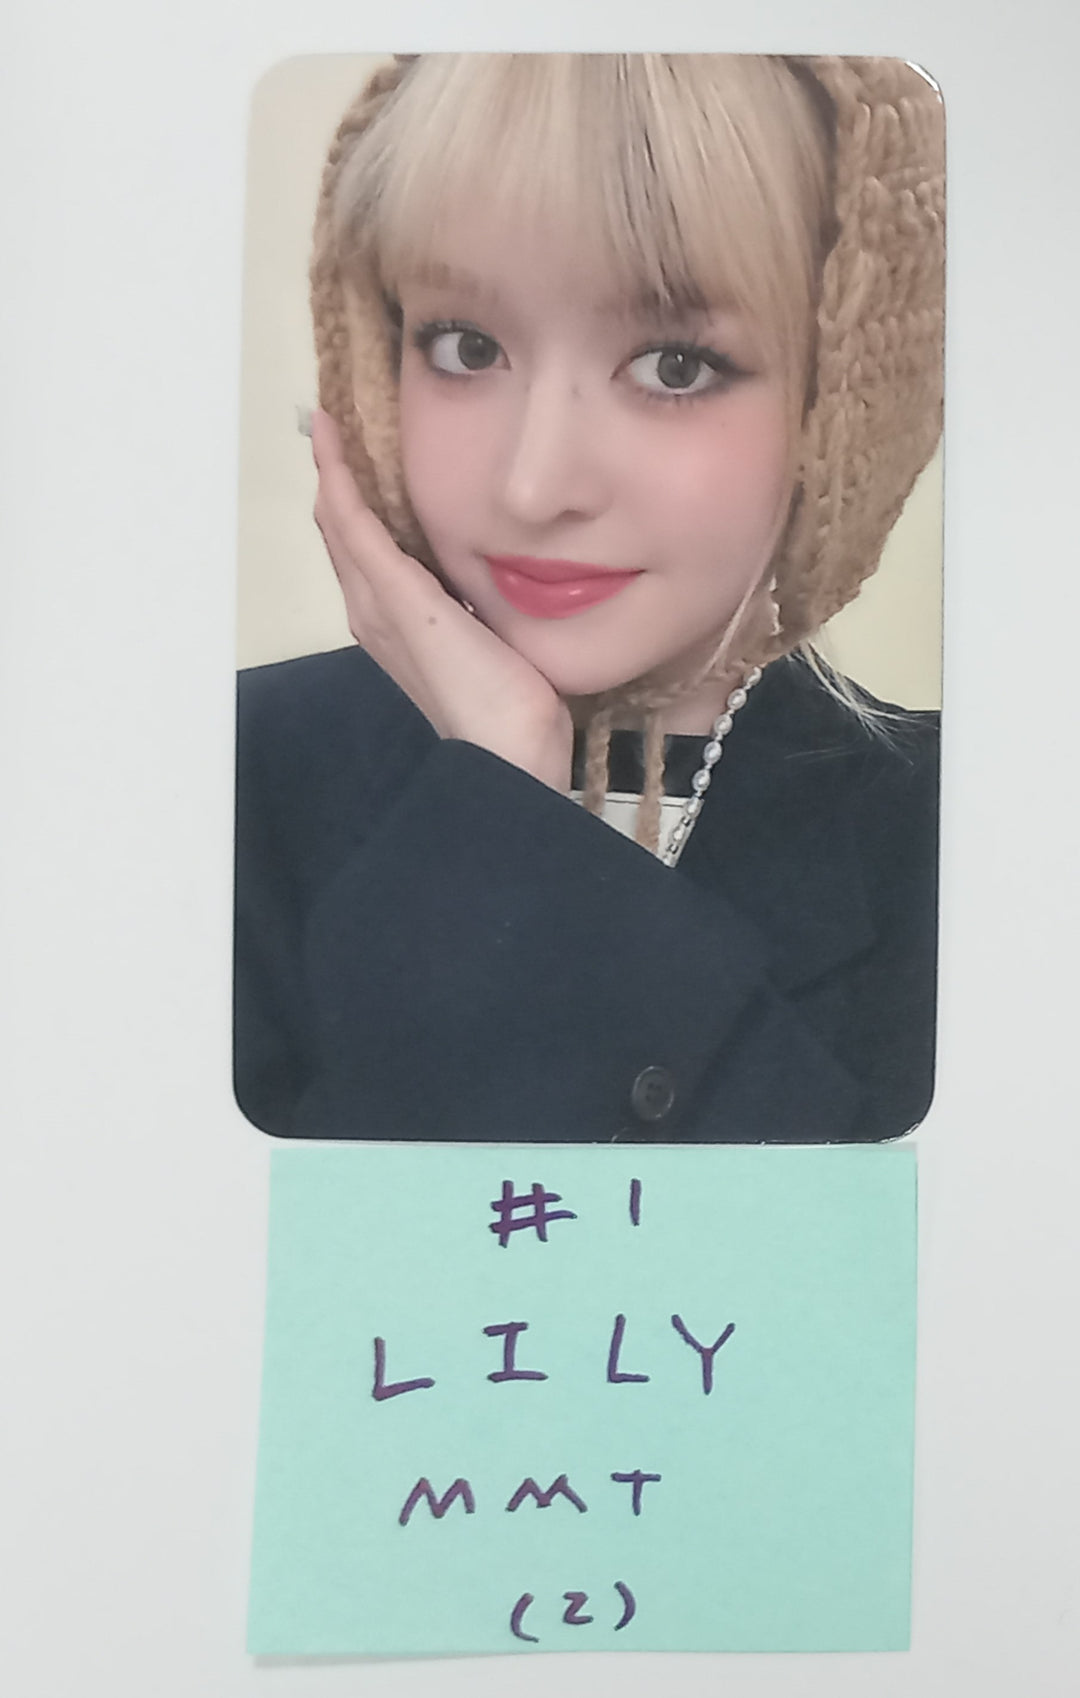 NMIXX "Fe3O4: BREAK" - MMT Fansign Event Photocard Round 3 [24.2.23]